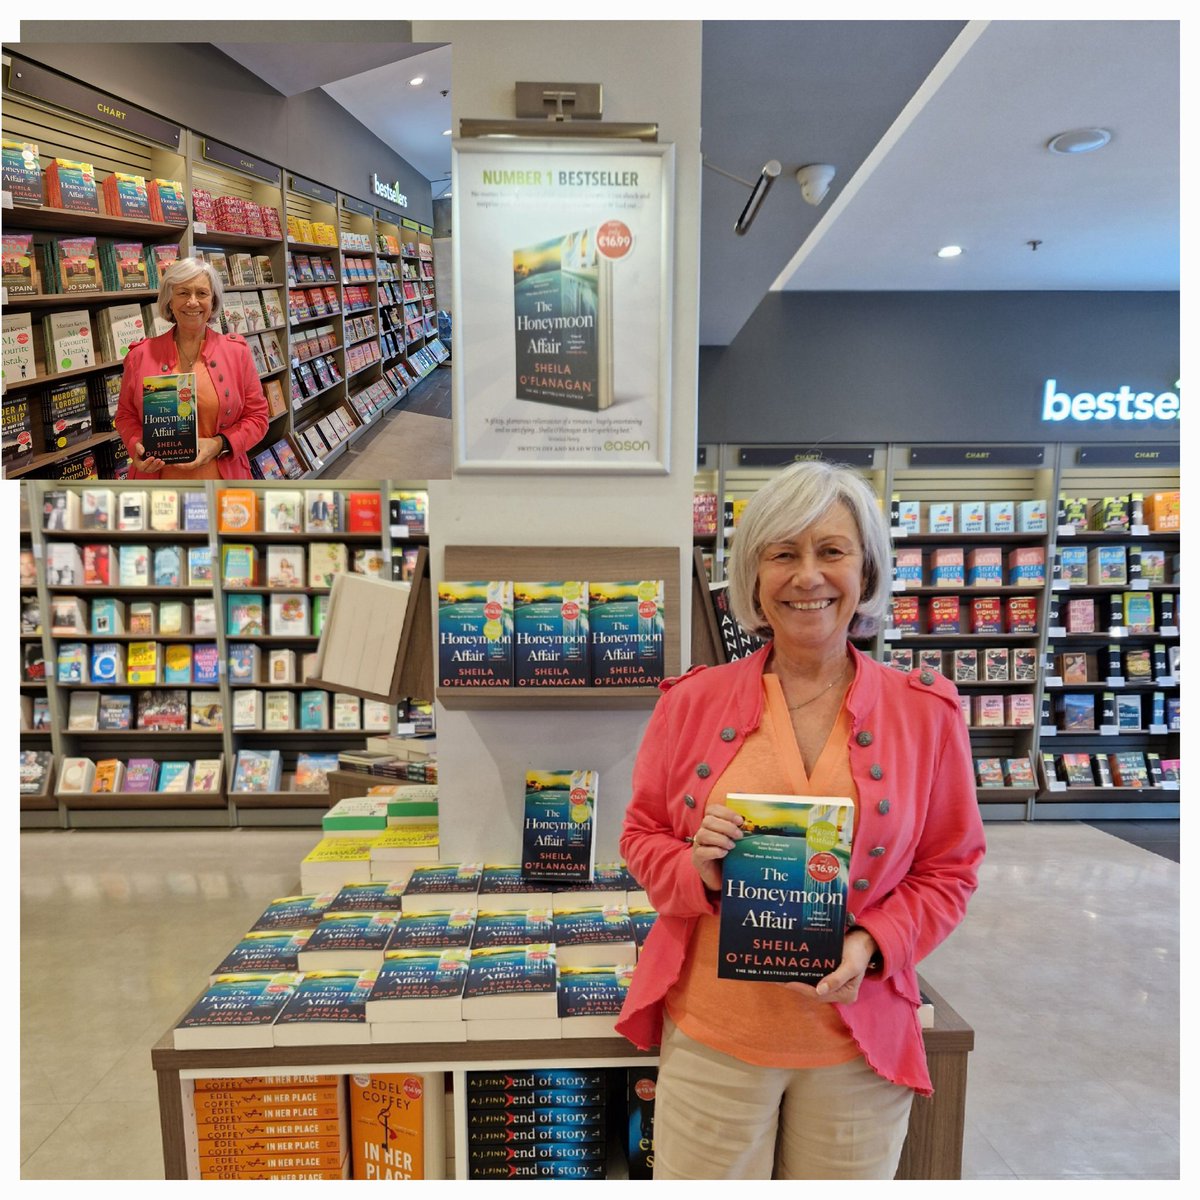 First stop on Sheila O'Flanagan's signing tour for #TheHoneymoonAffair   at @easons O'Connell Street.  Lovely #1 Bestseller displays. Many thanks to the kind booksellers who helped us out.
@sheilaoflanagan 
@headlinepg